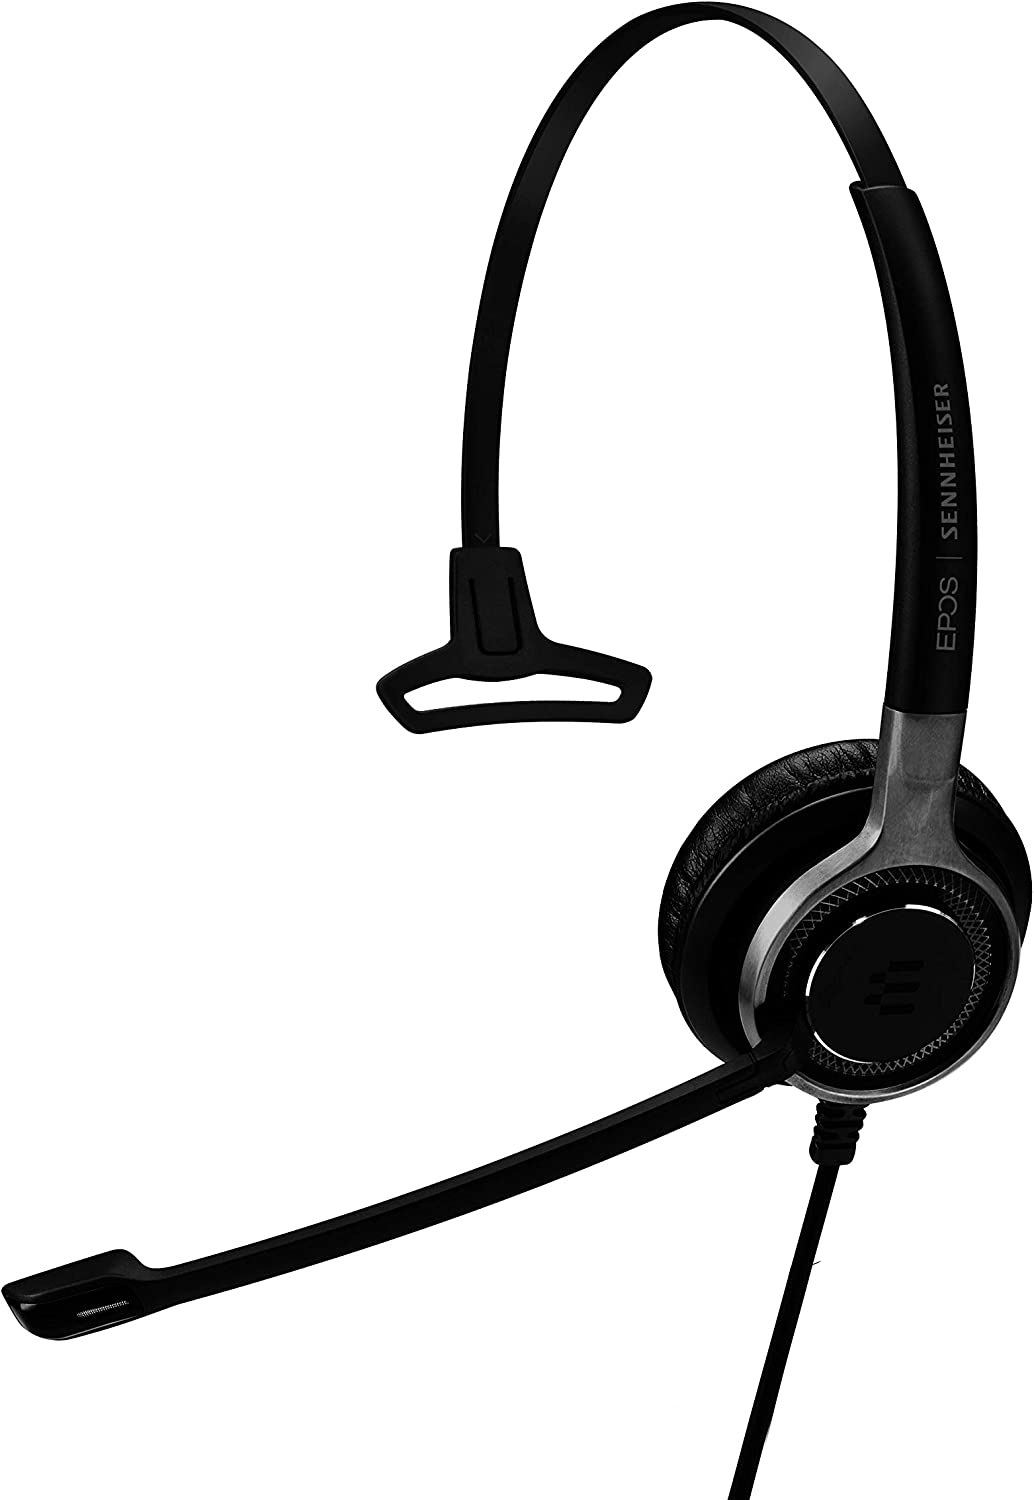 Epos Sennheiser SC 630 USB ML (504552) - Single-Sided Business Headset | For Skype for Business | with HD Sound, Ultra Noise-Cancelling Microphone &amp; USB Connector (Black)